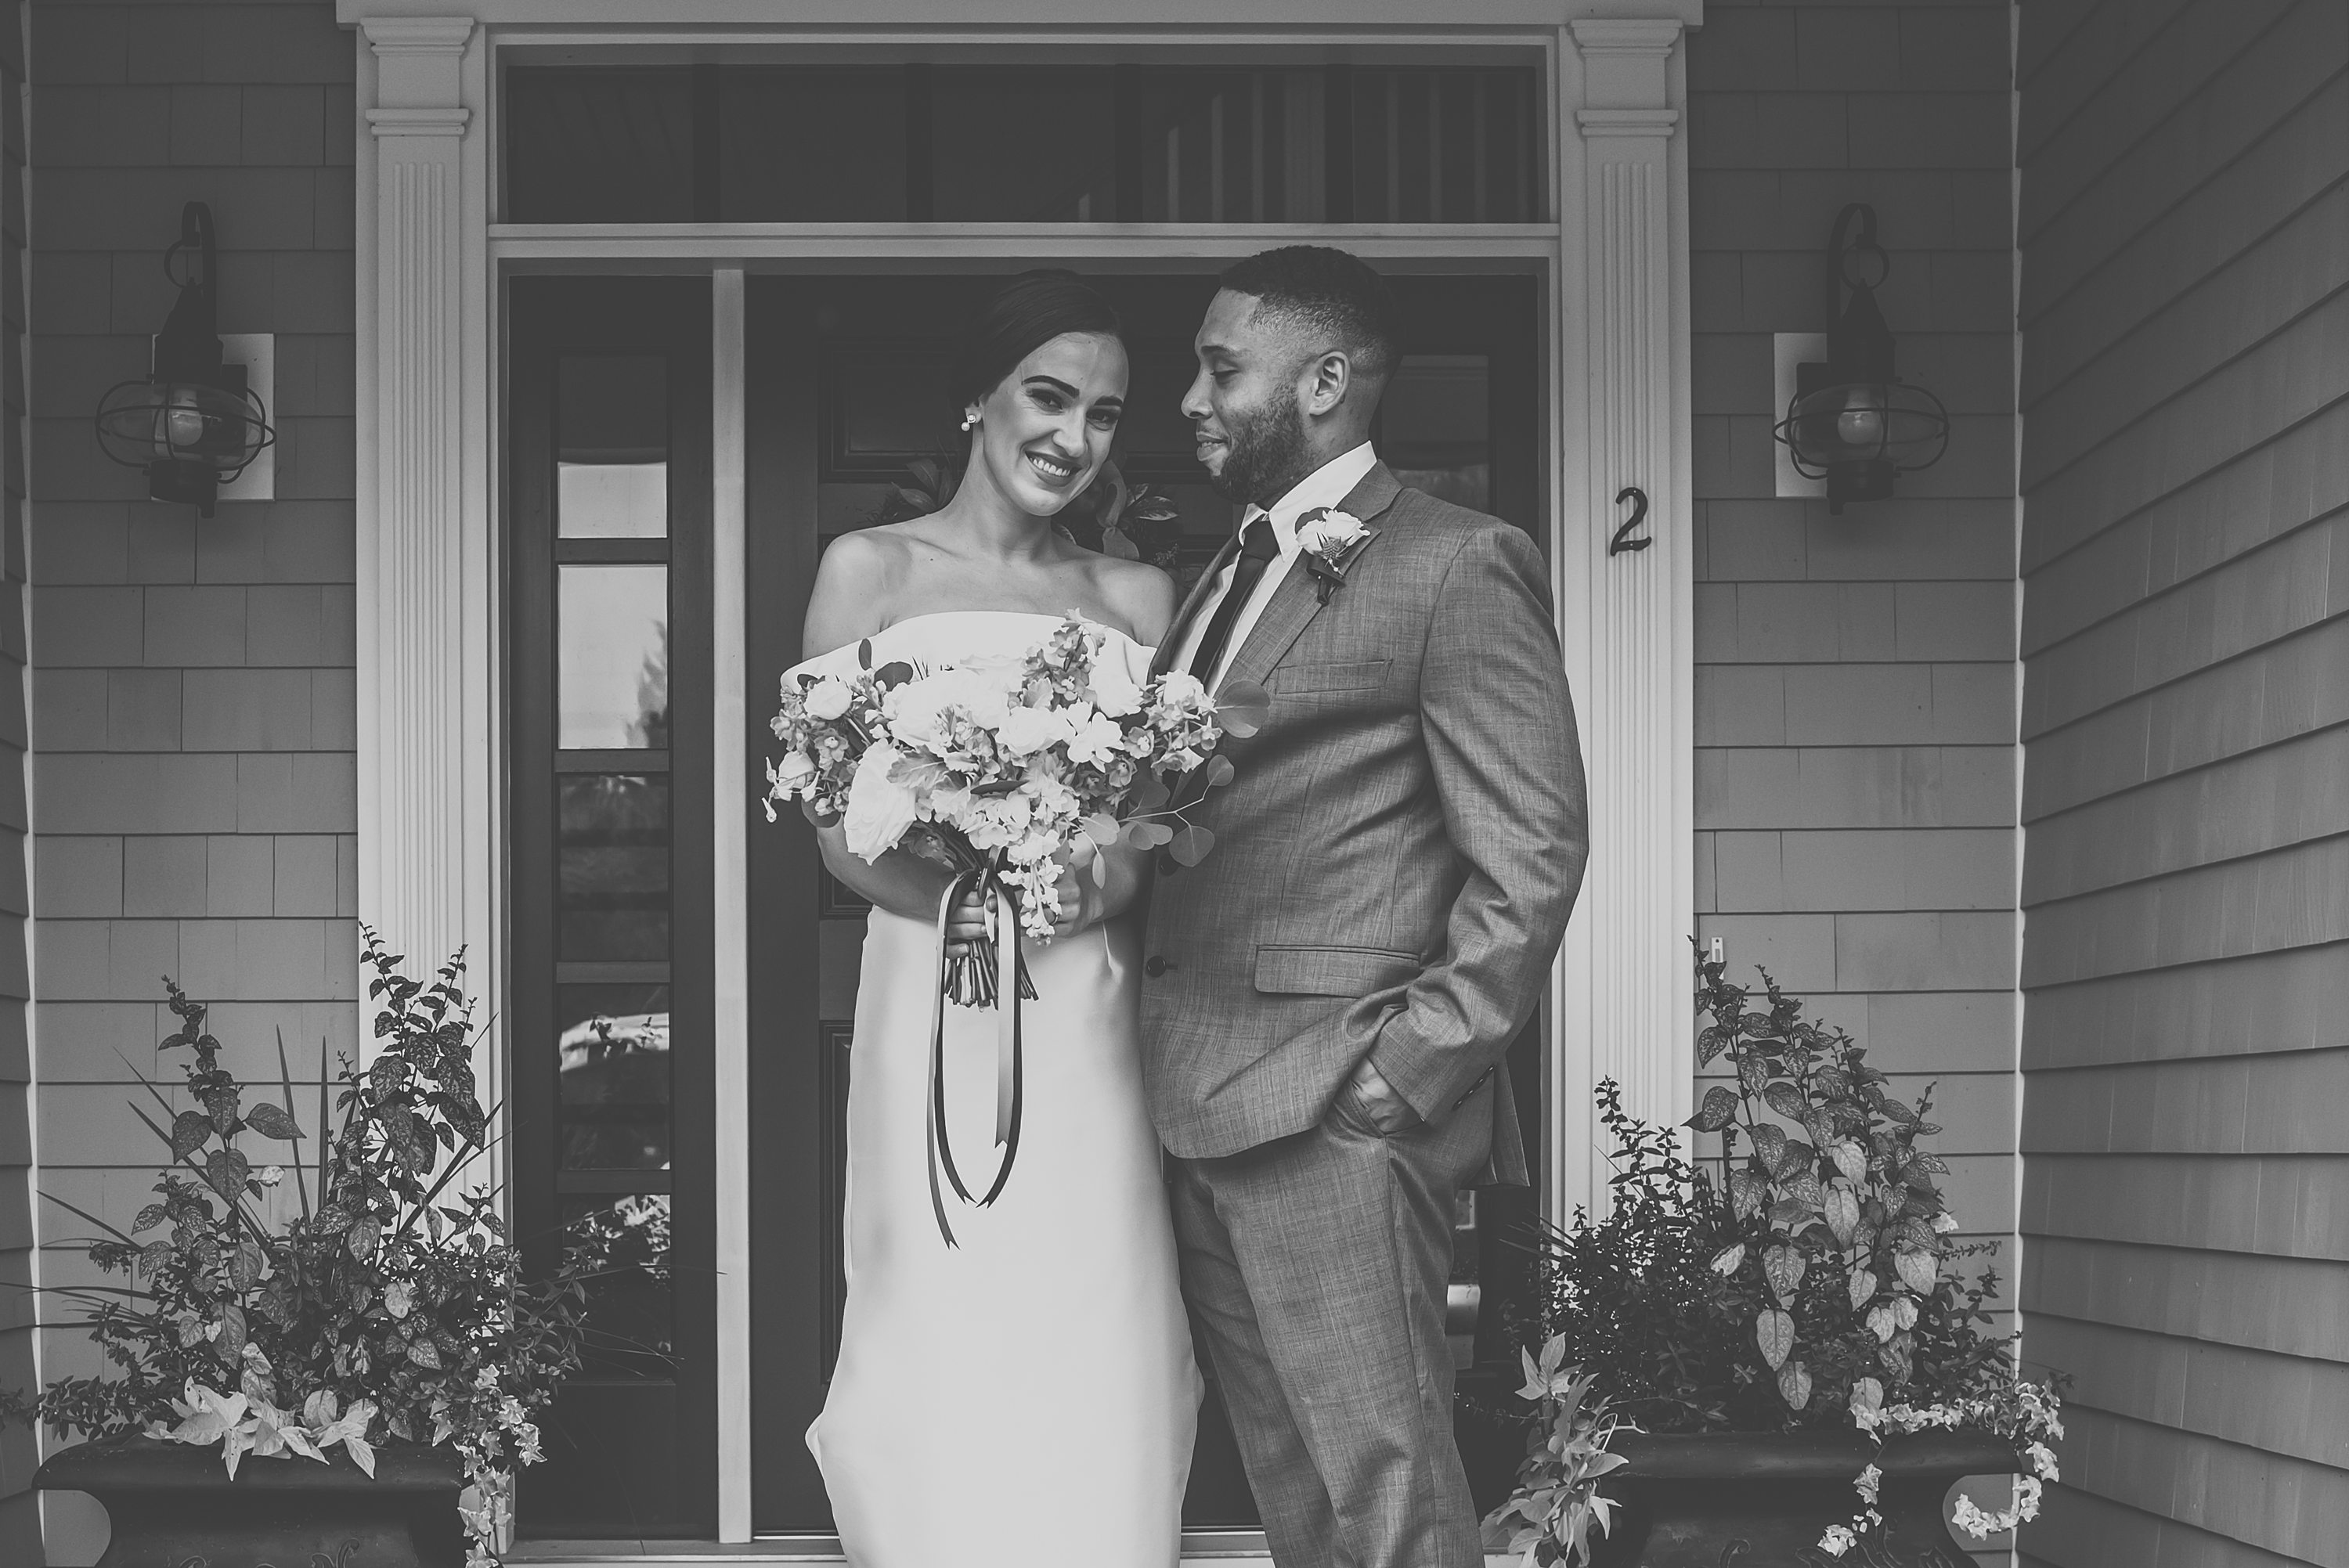 South Shore Wedding Photographer,New Bedford City Hall,City Hall Wedding,City Hall Elopement,New Bedford City Hall Elopement,New Bedford Wedding,Intimate backyard wedding,Intimate backyard elopement,Providence Public Library Wedding,Russell Morin Catering